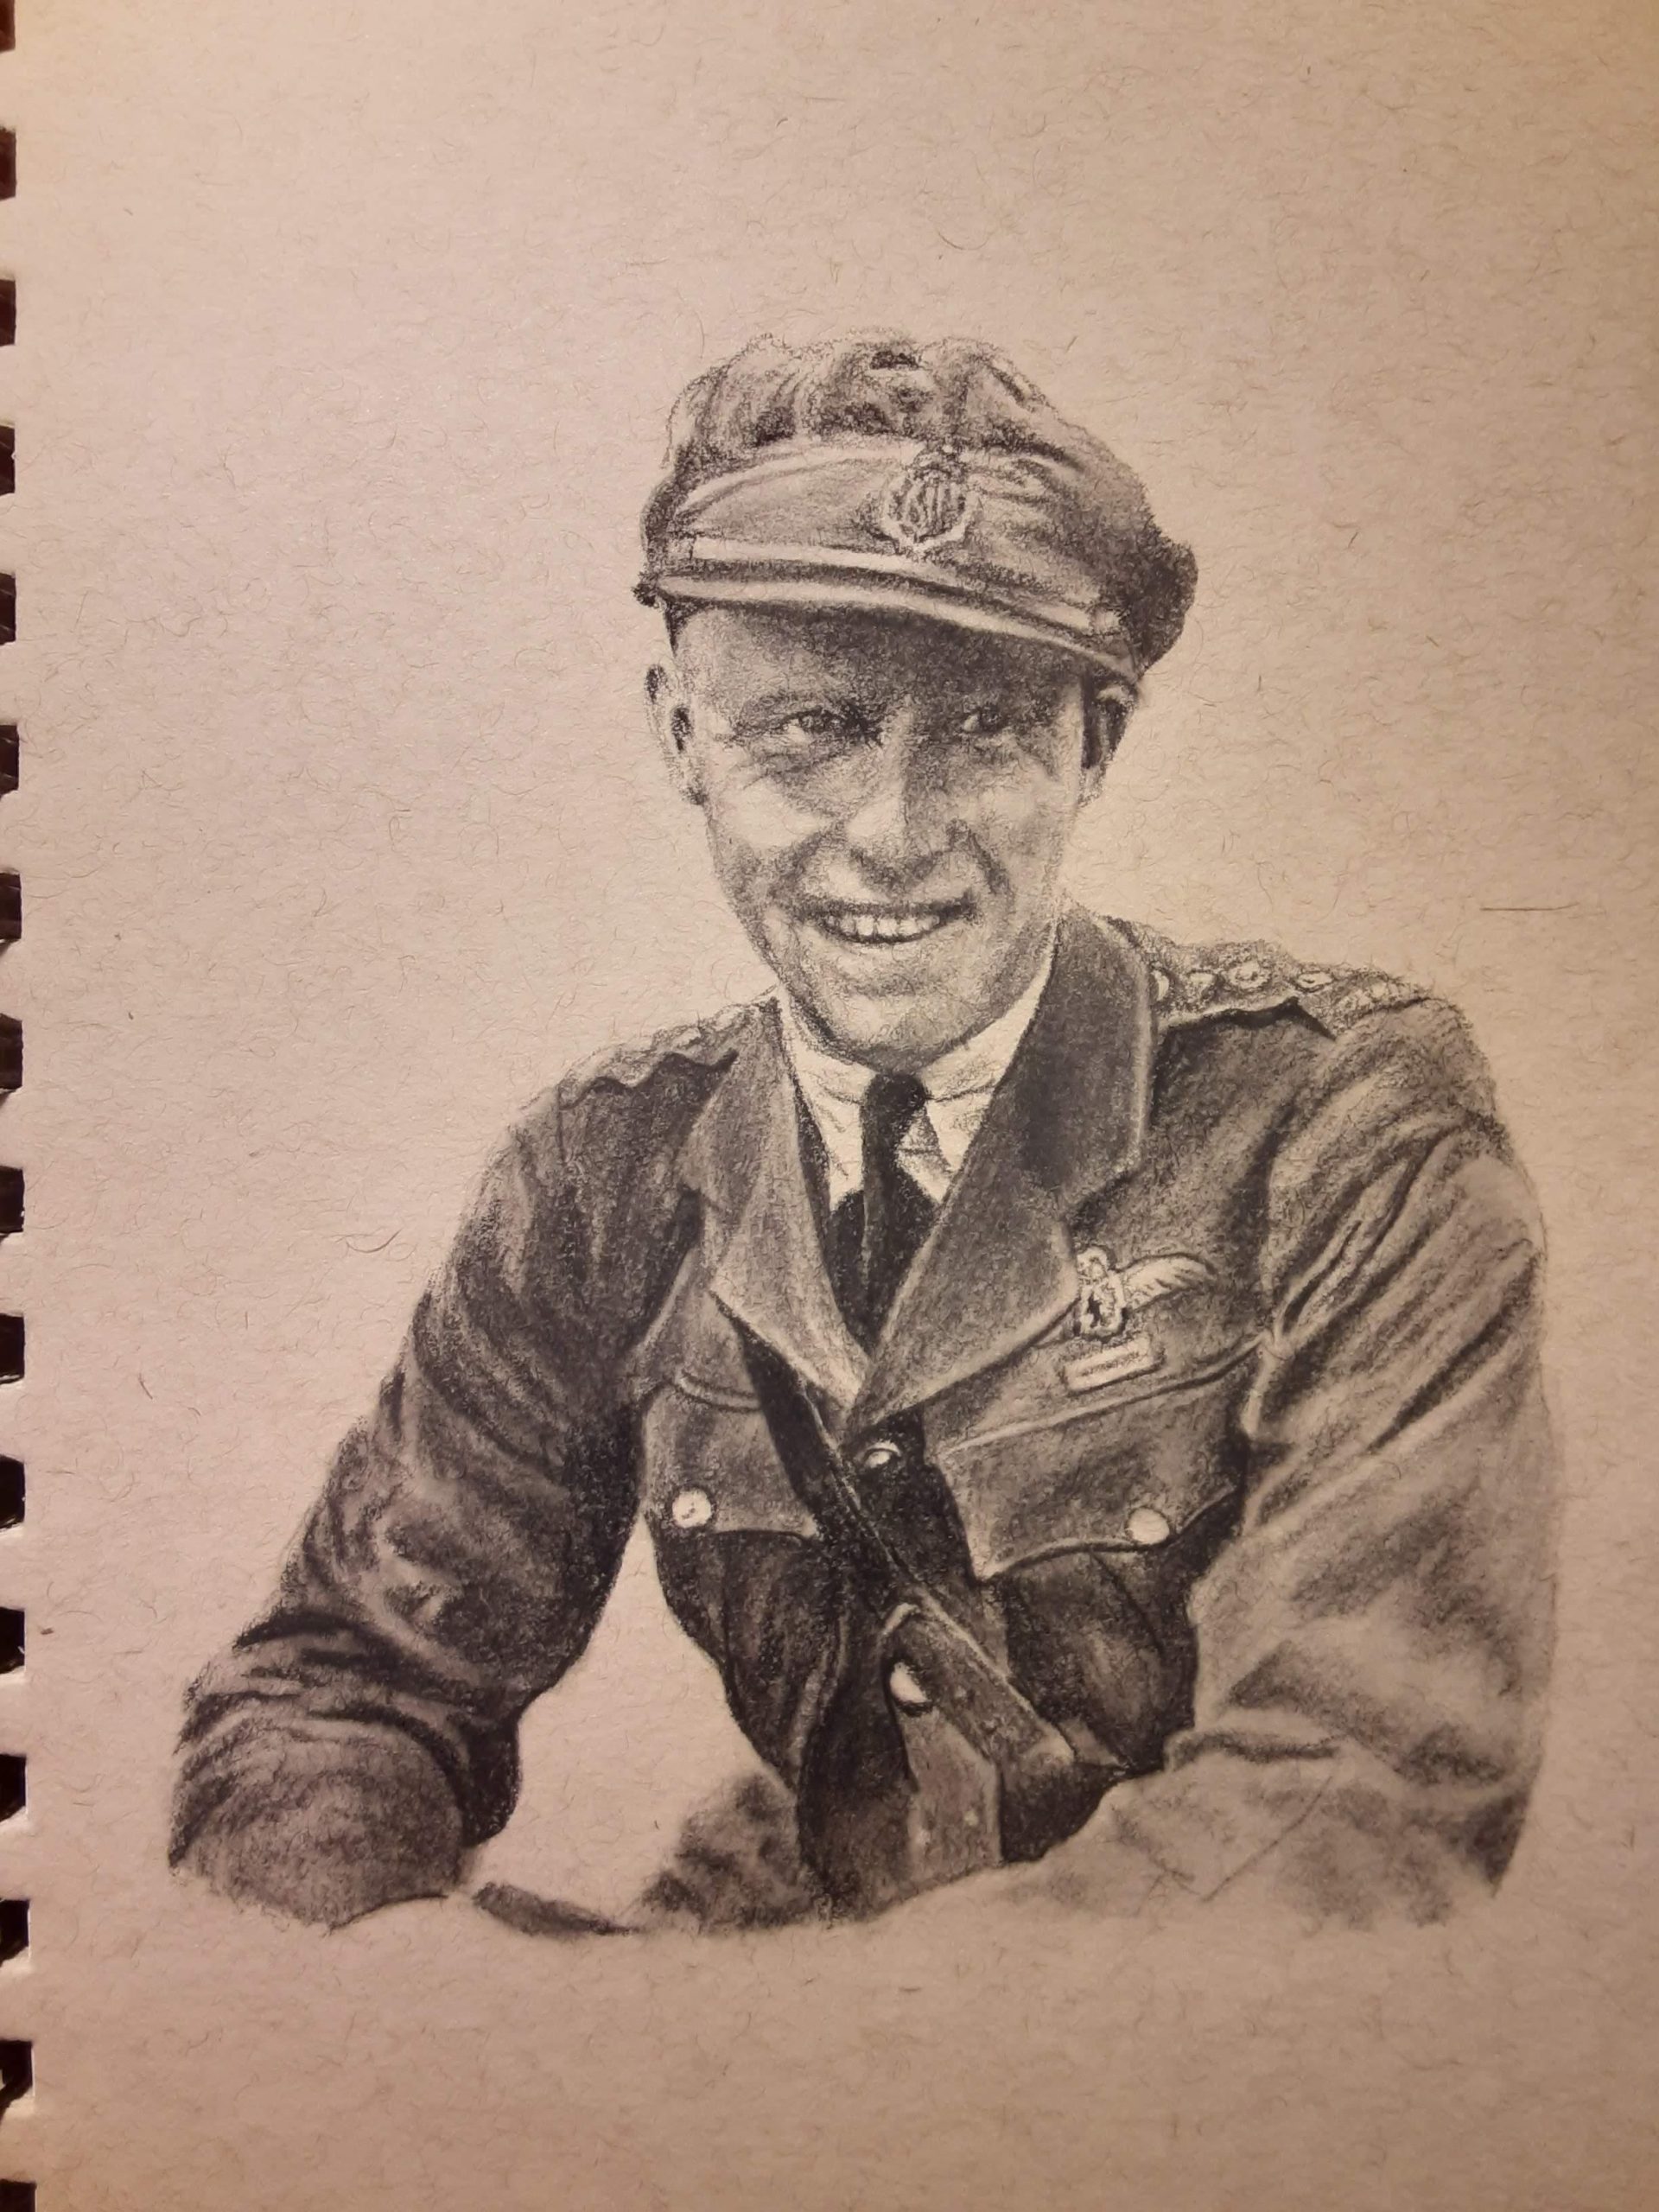 Charcoal sketch of Wilfrid Reid “Wop” Would perhaps maybe, OBE, DFC. Canadian flying ace within the First World War and a main put up-battle aviator.